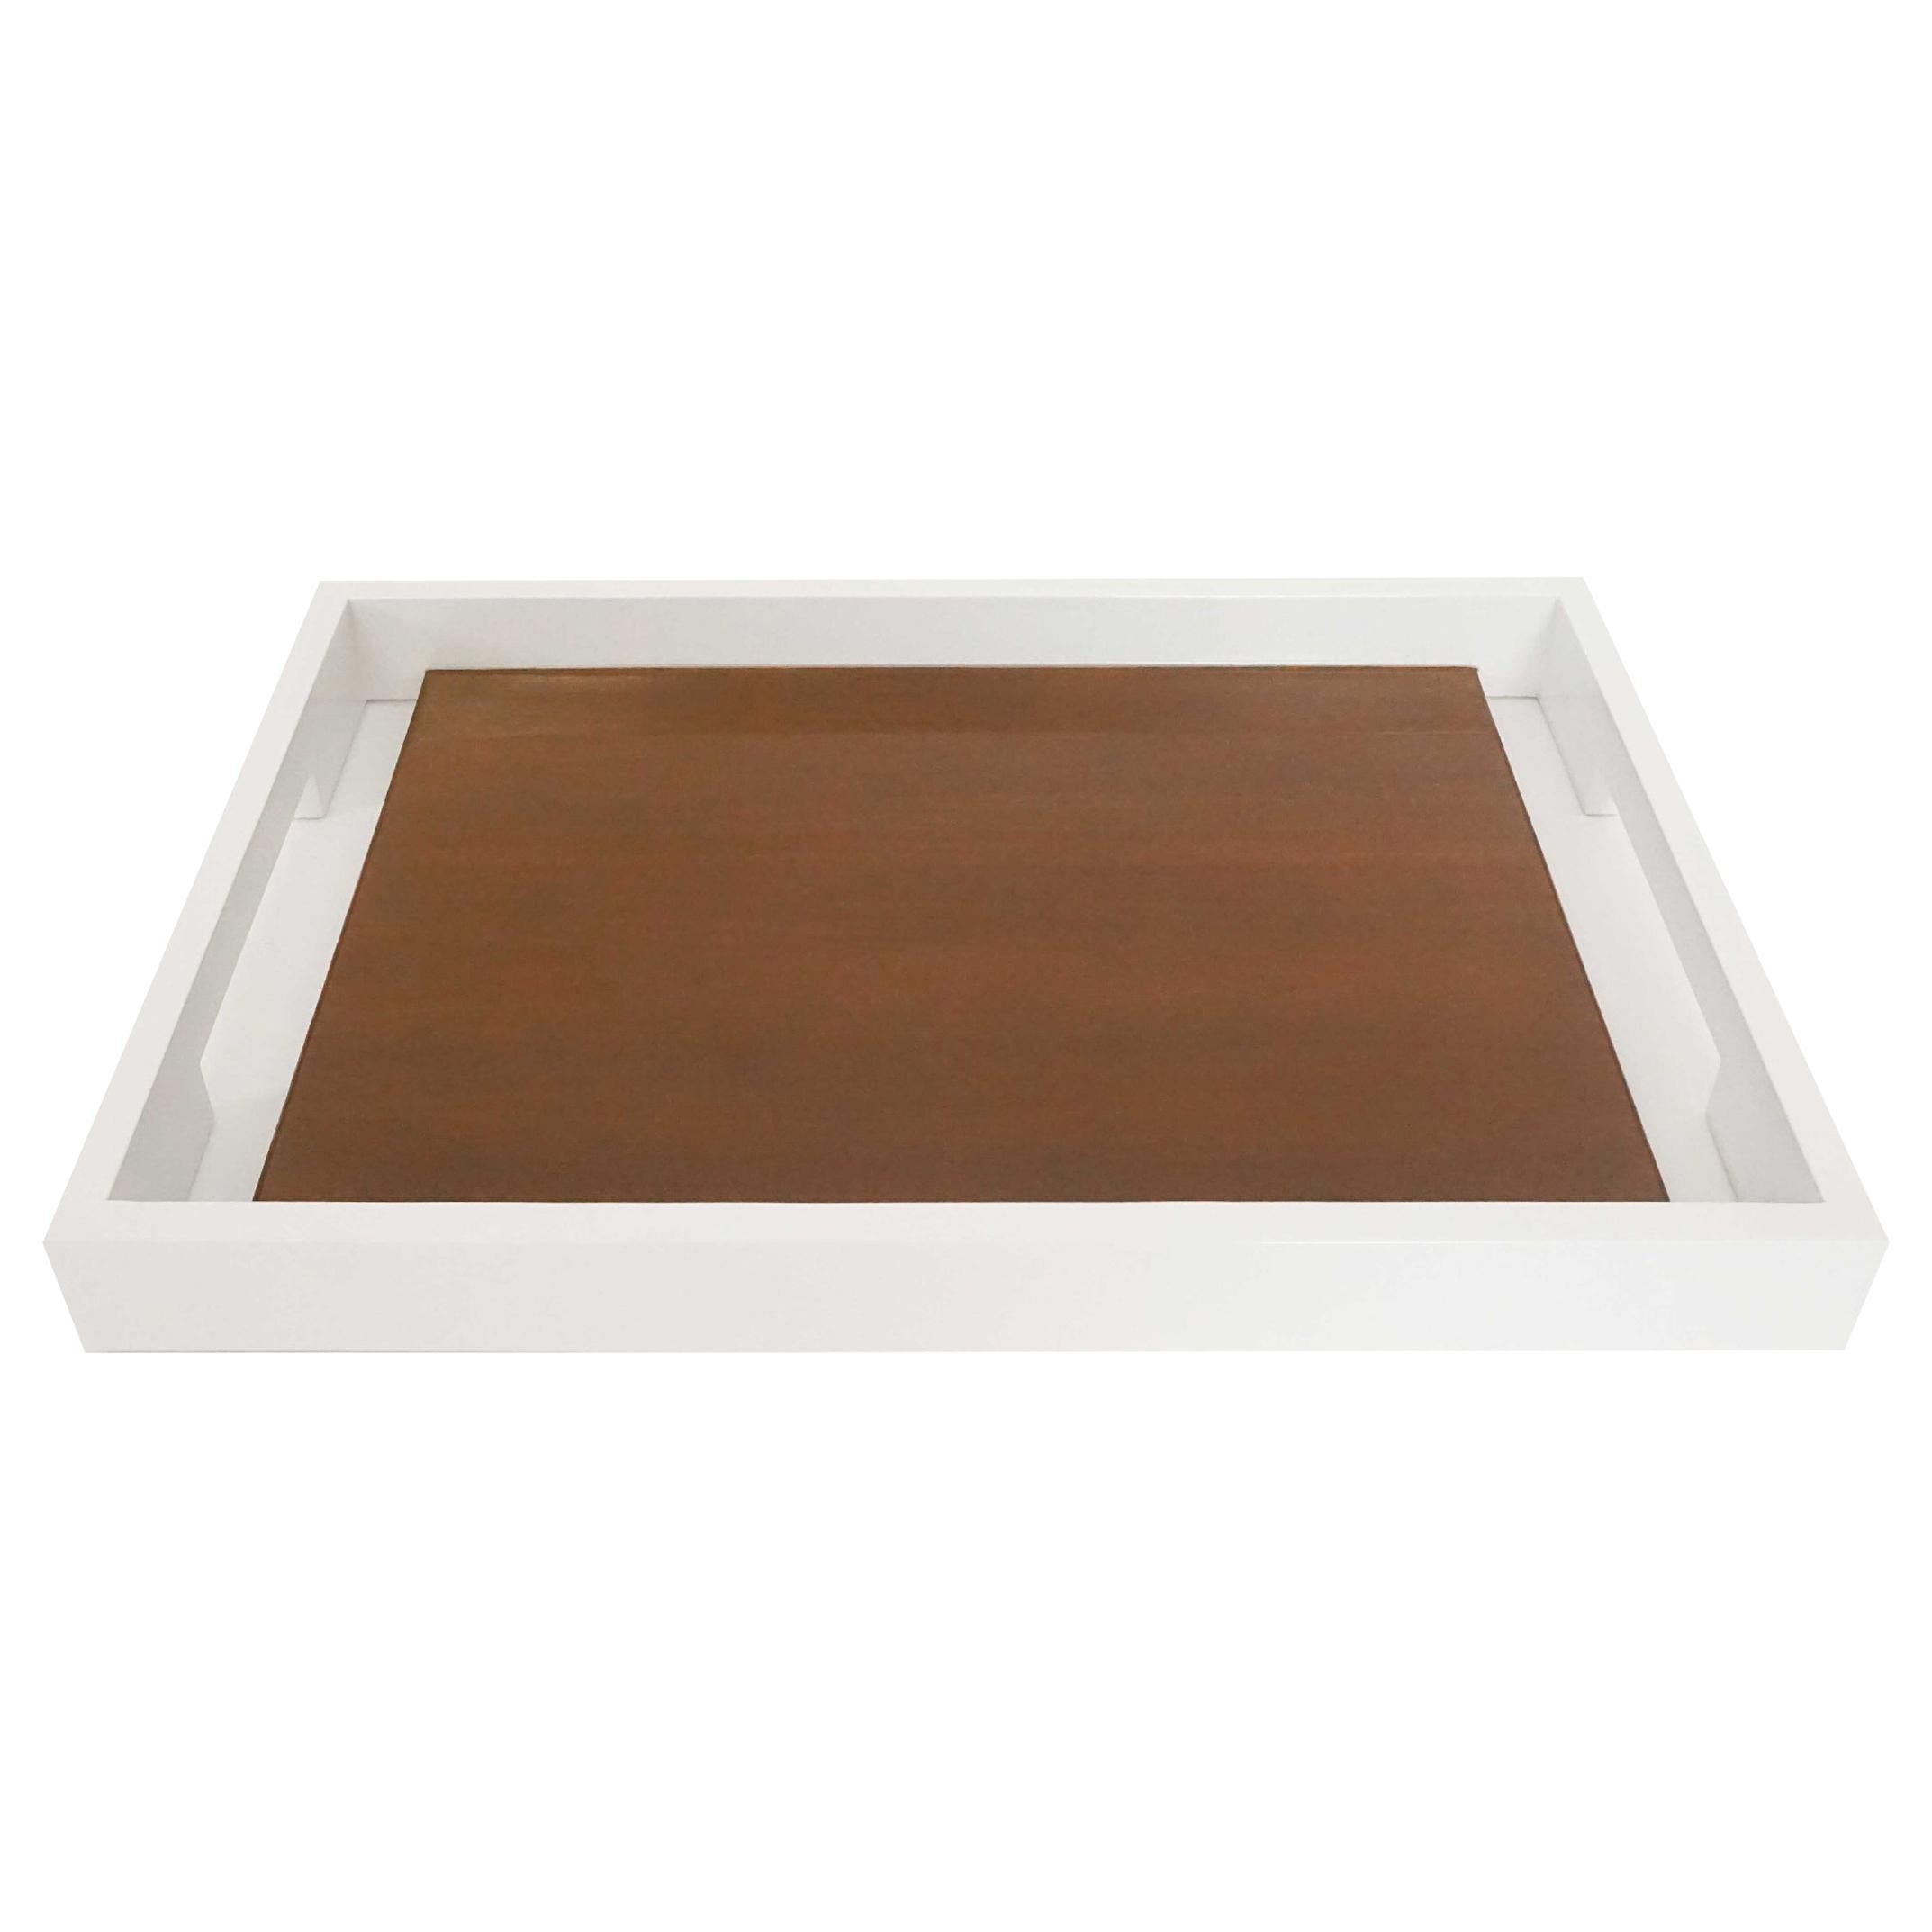 Walnut Center Tray with White Lacquer Exterior